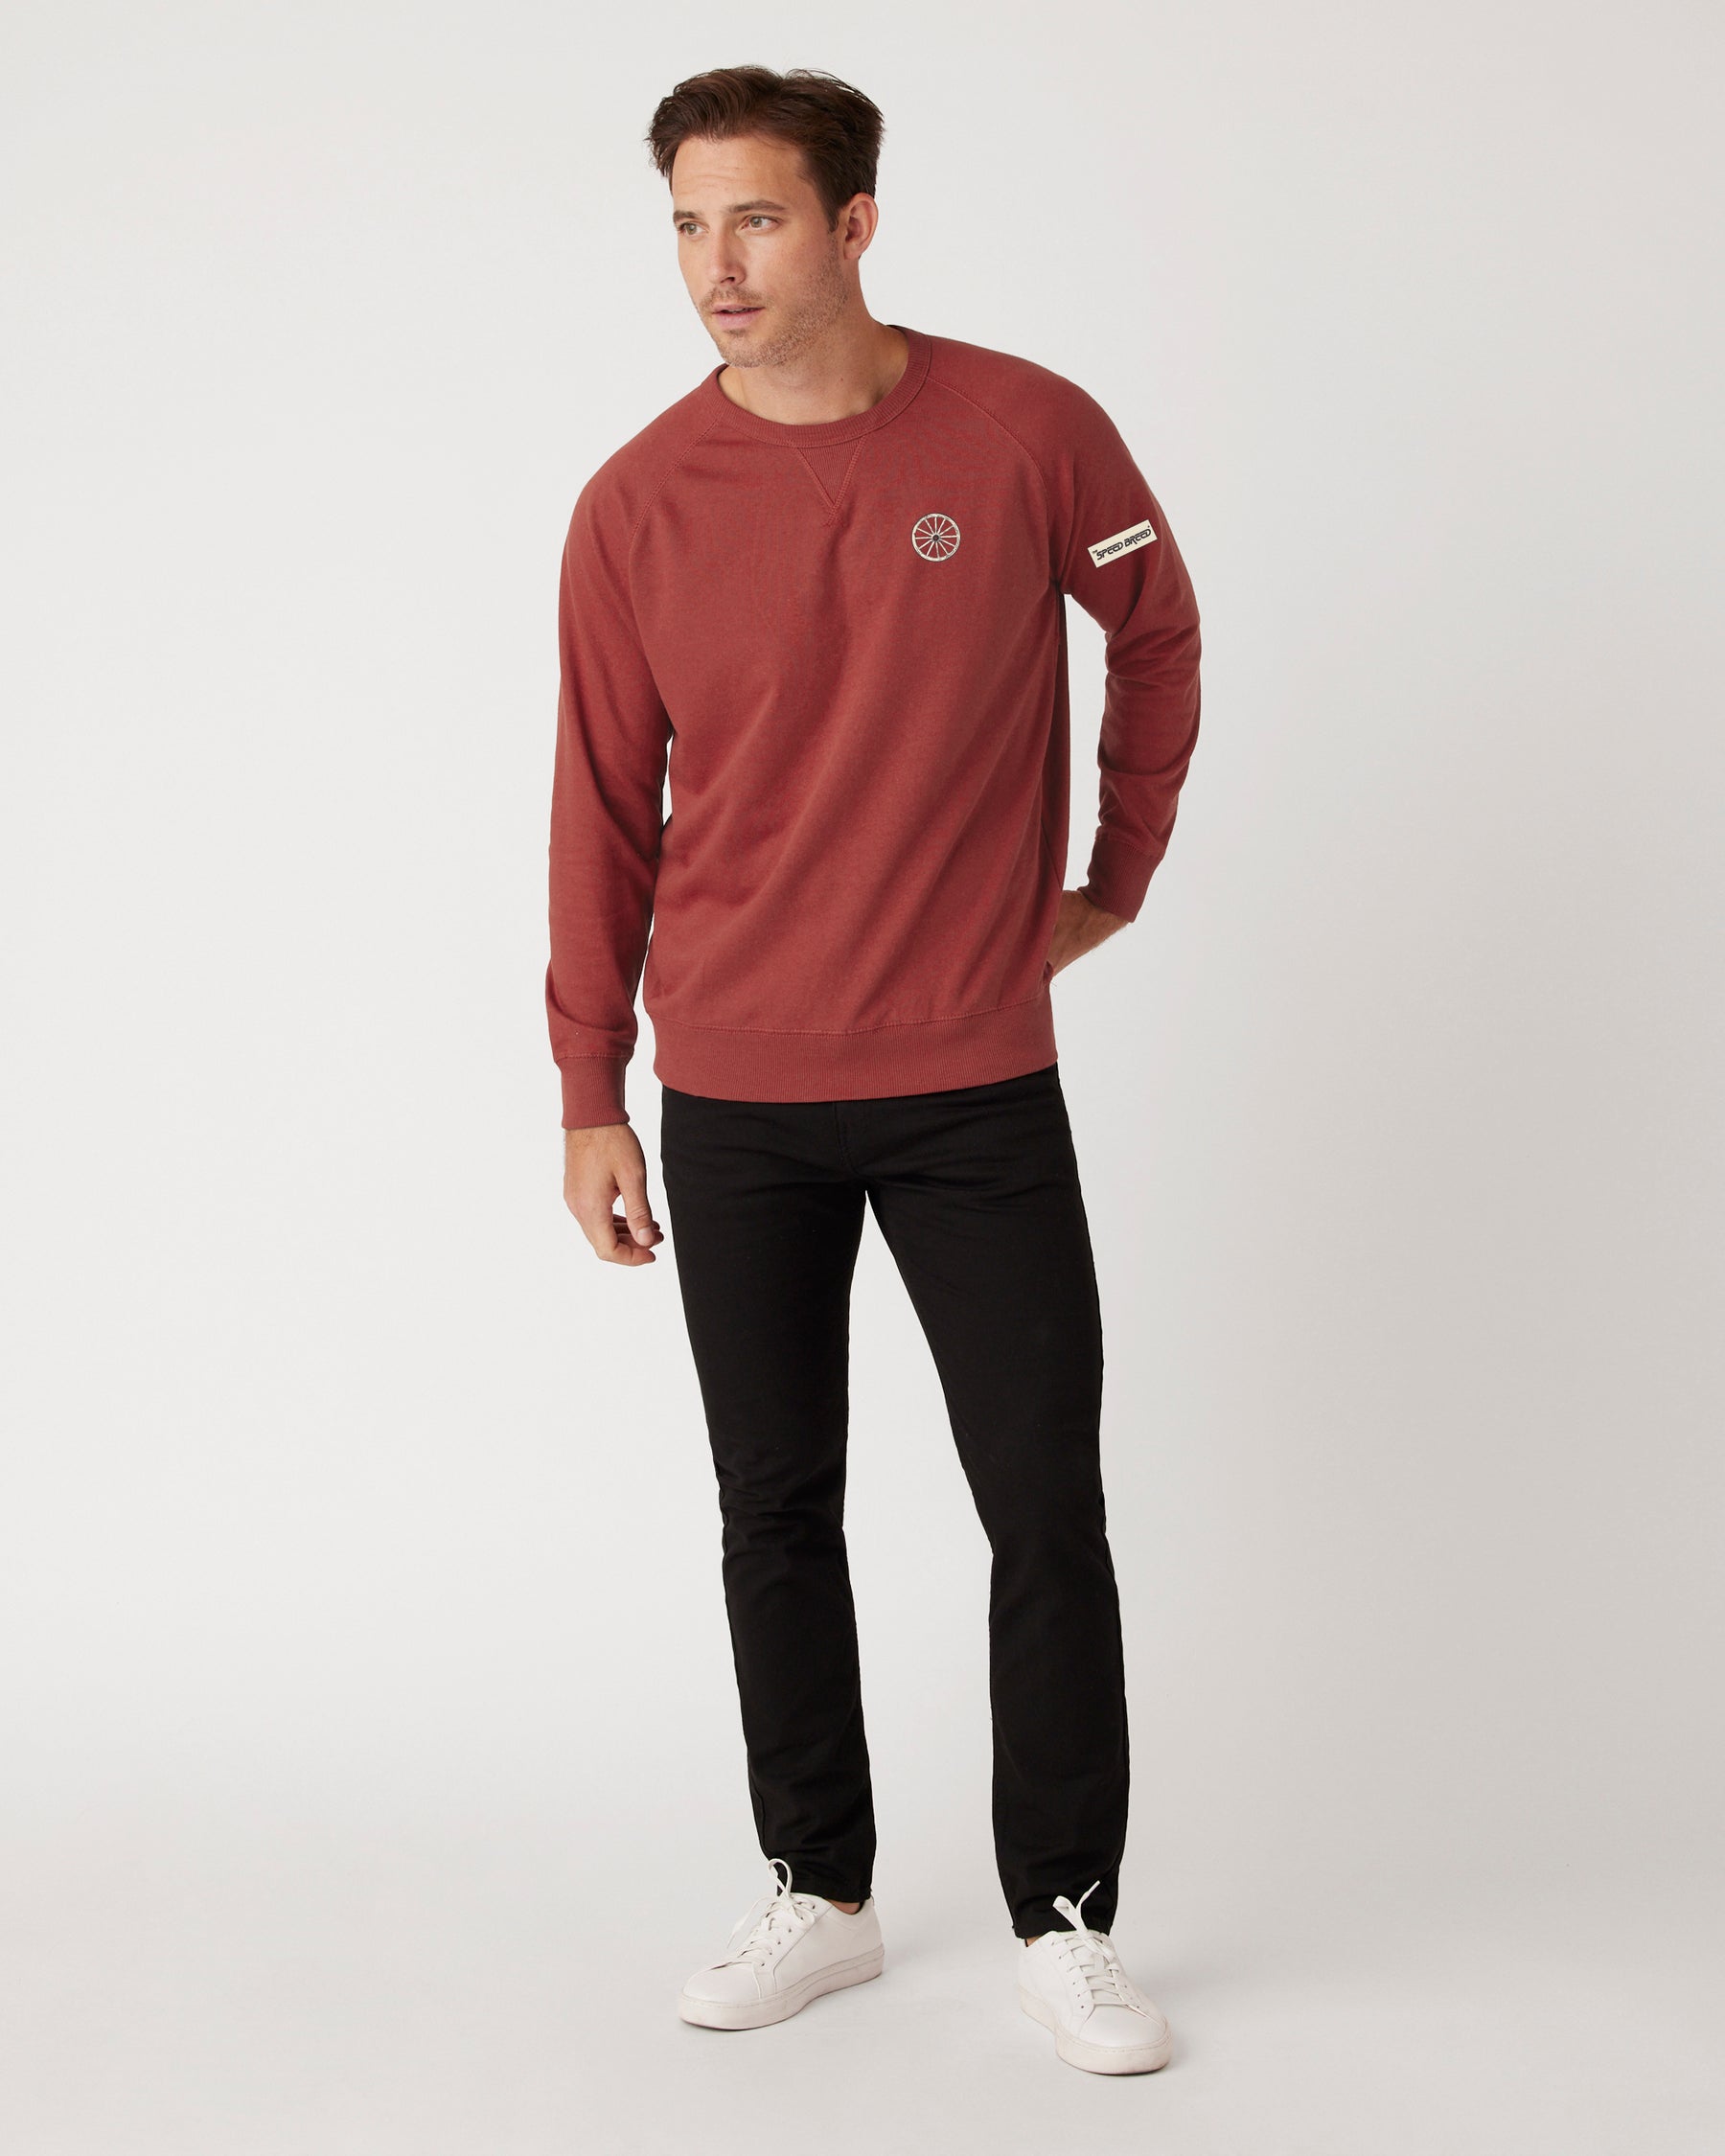 CHARIOTS EMBROIDERED UNISEX FRENCH TERRY CREW NECK SWEATER (Spice Red)